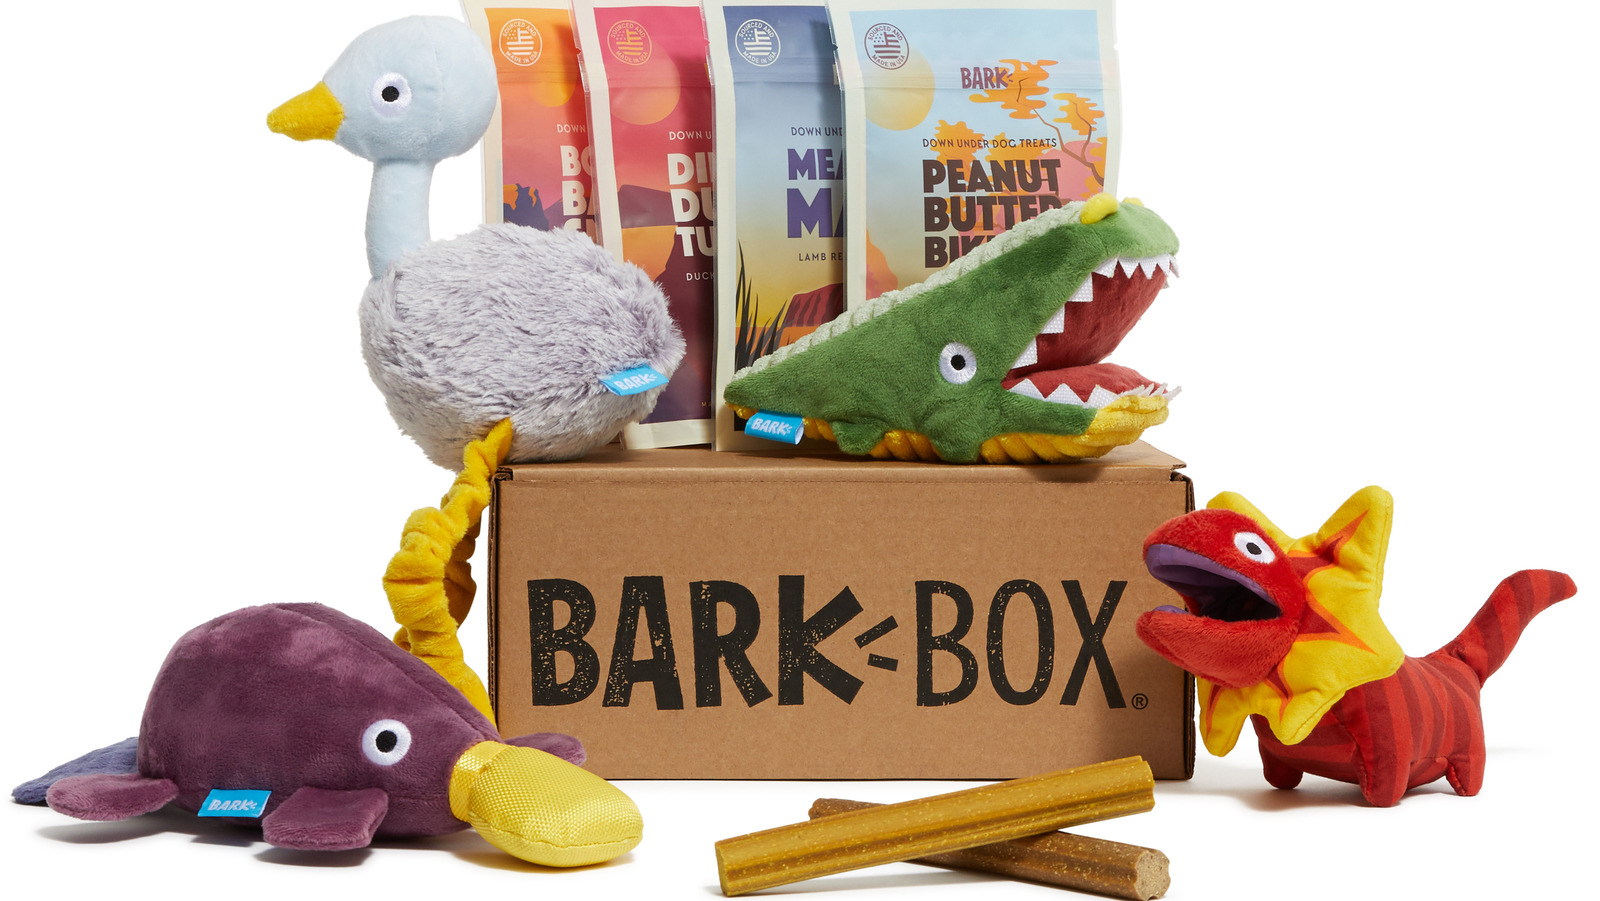 Is The BarkBox Subscription Really Worth The Money?